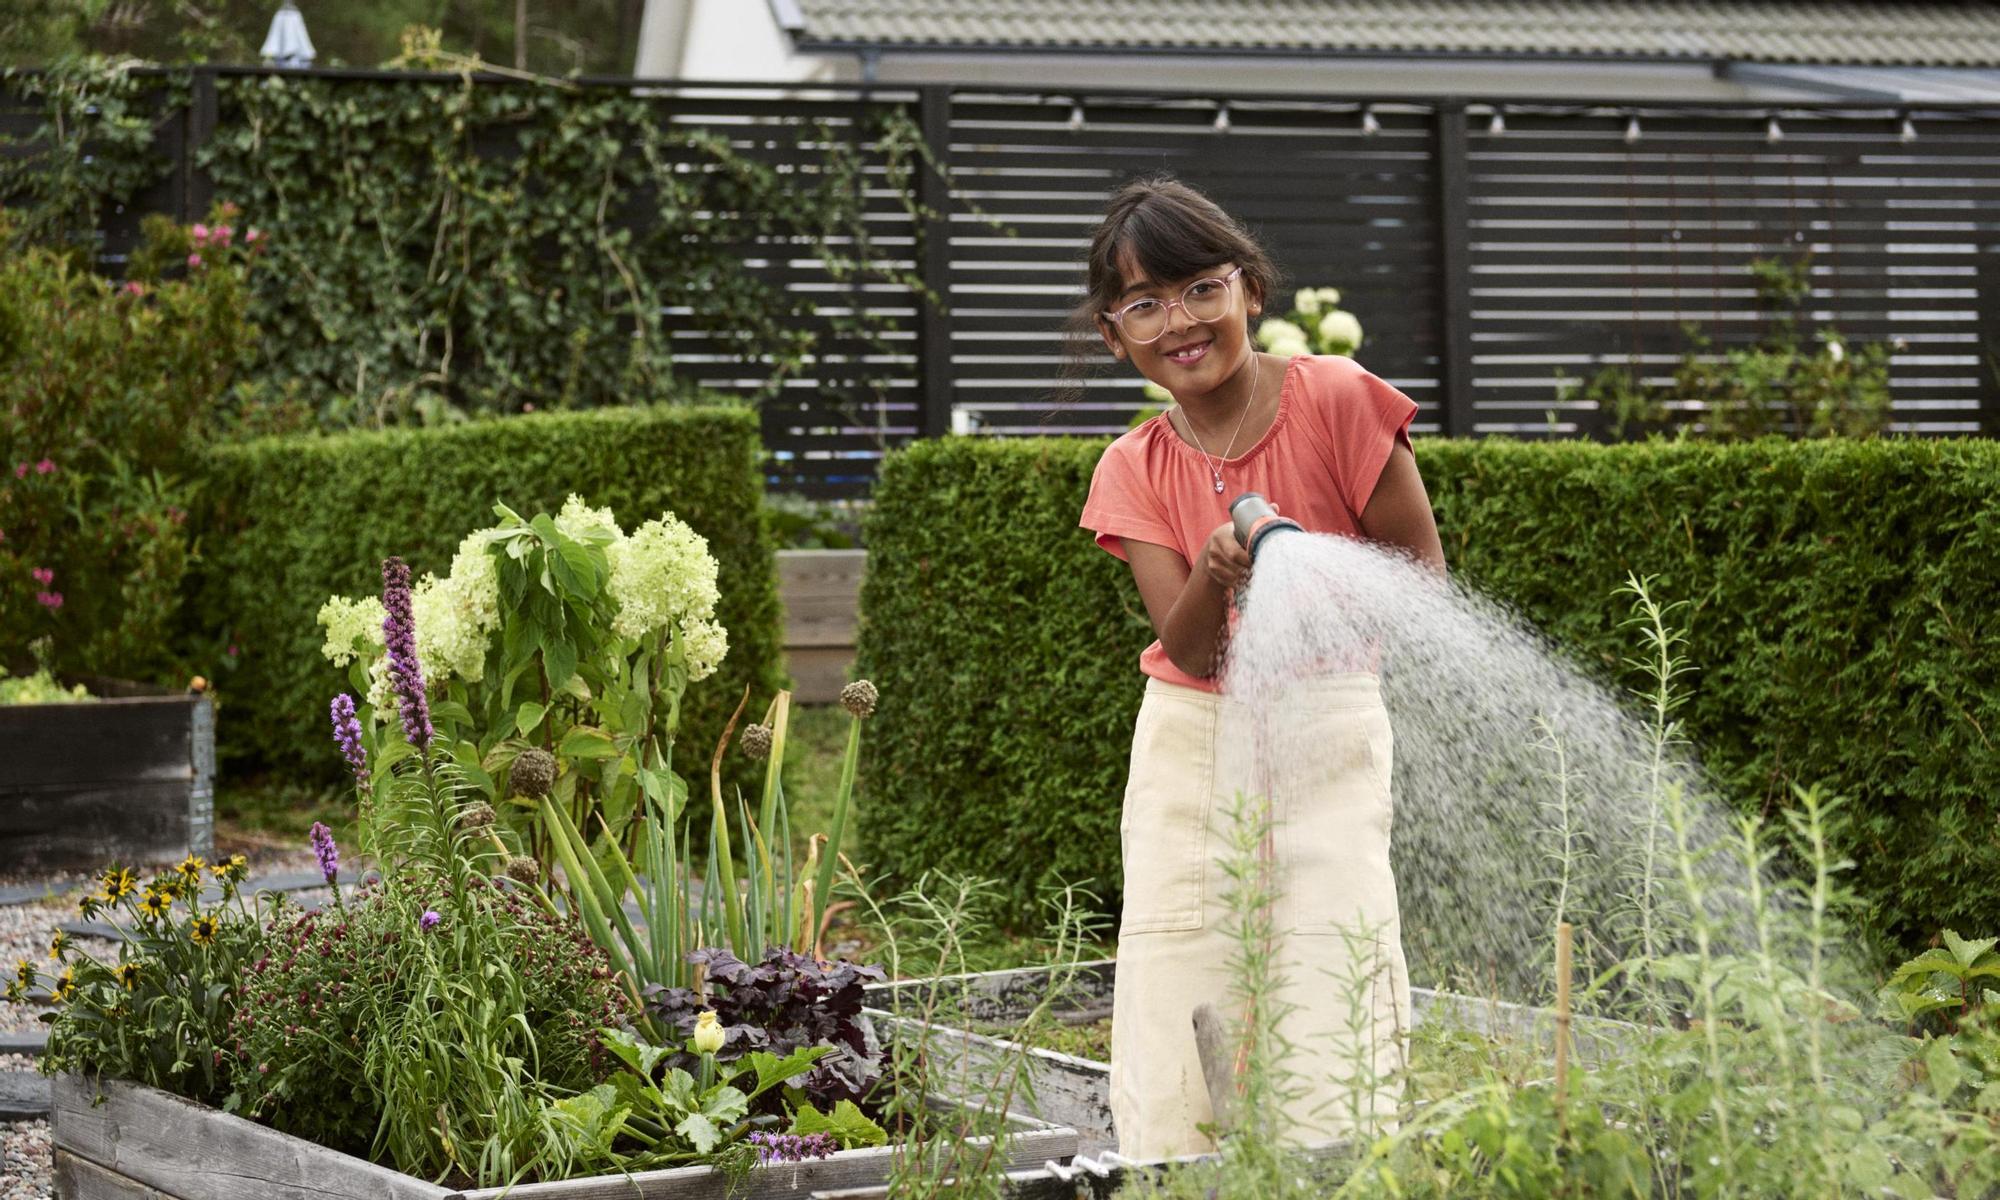 Girl watering the kitchen garden. Solar panel in the background